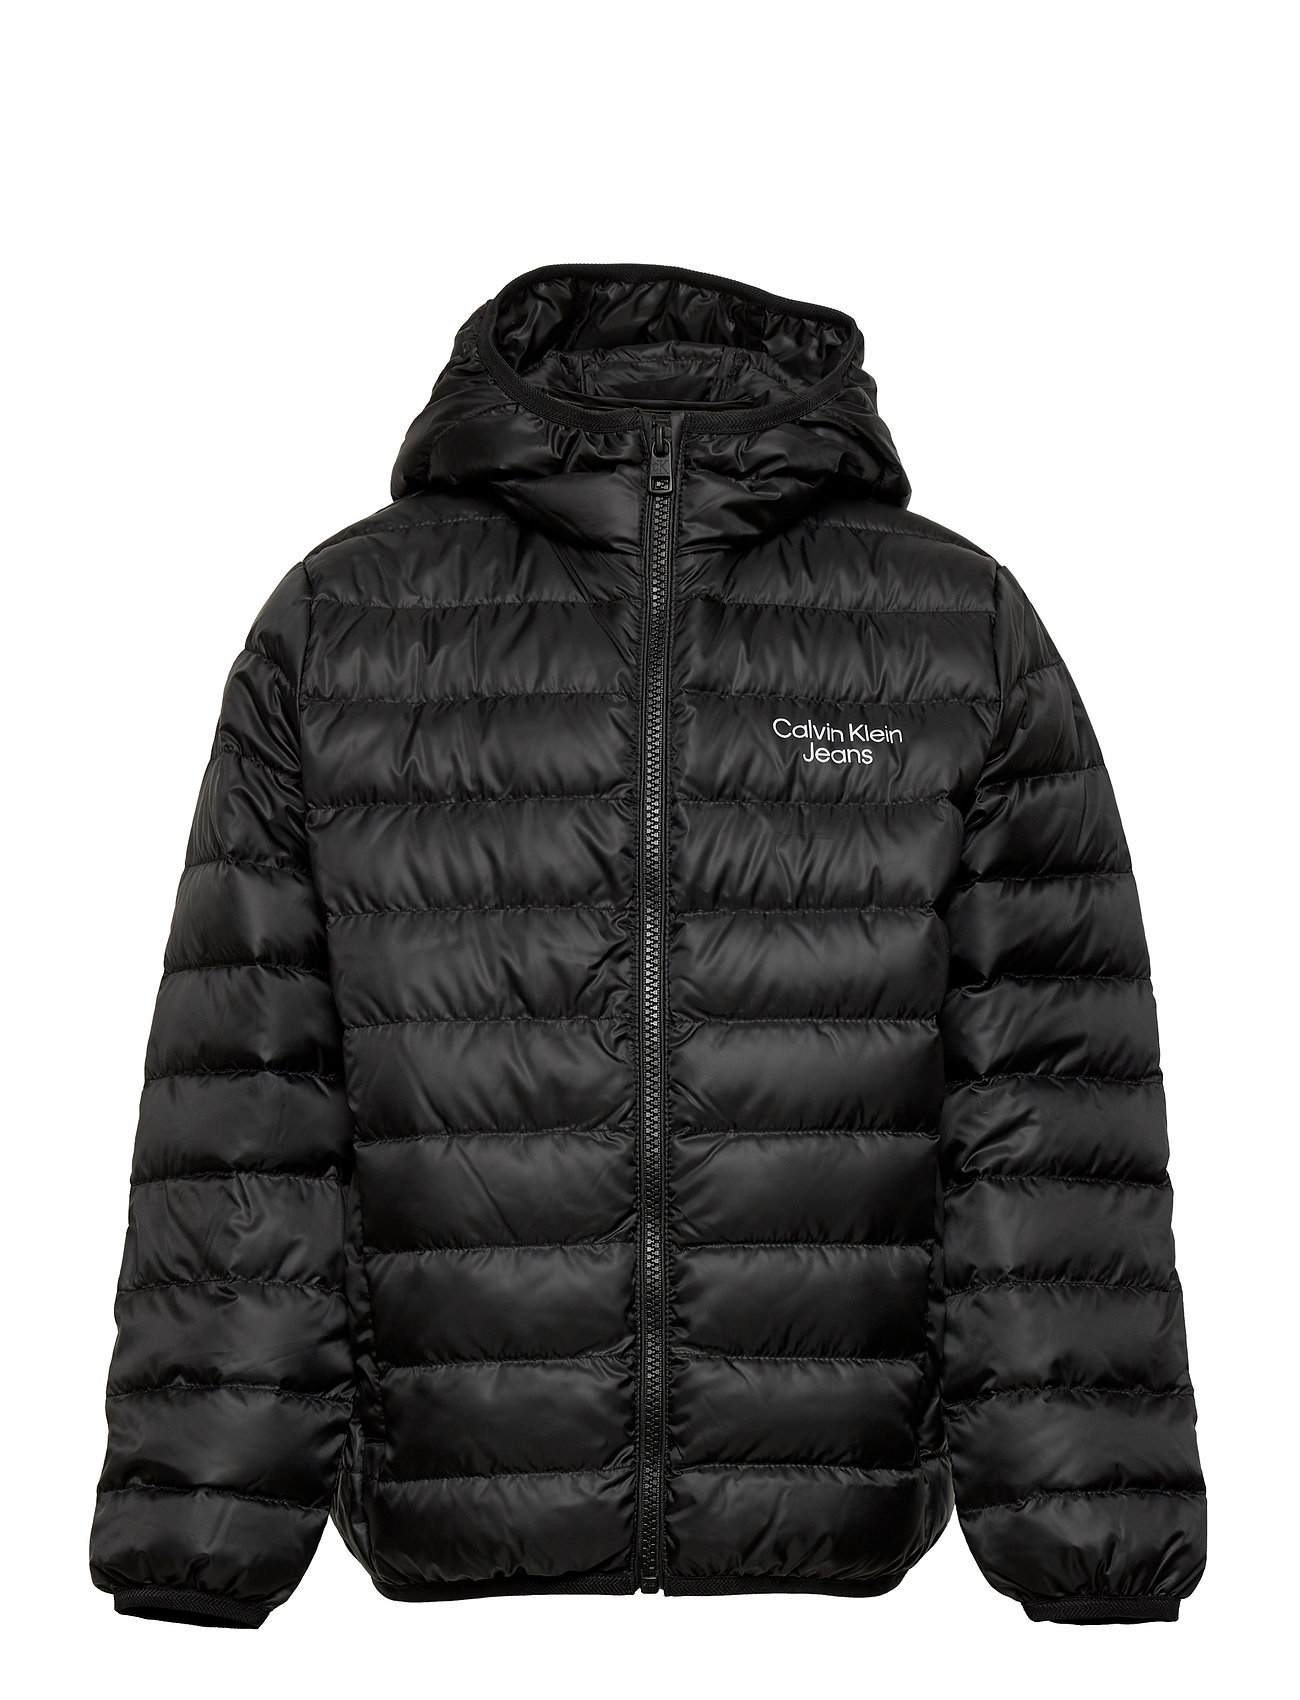 Calvin Klein Lw Down Logo Jacket - 84.95 €. Buy Puffer & Padded from Calvin  Klein online at Boozt.com. Fast delivery and easy returns